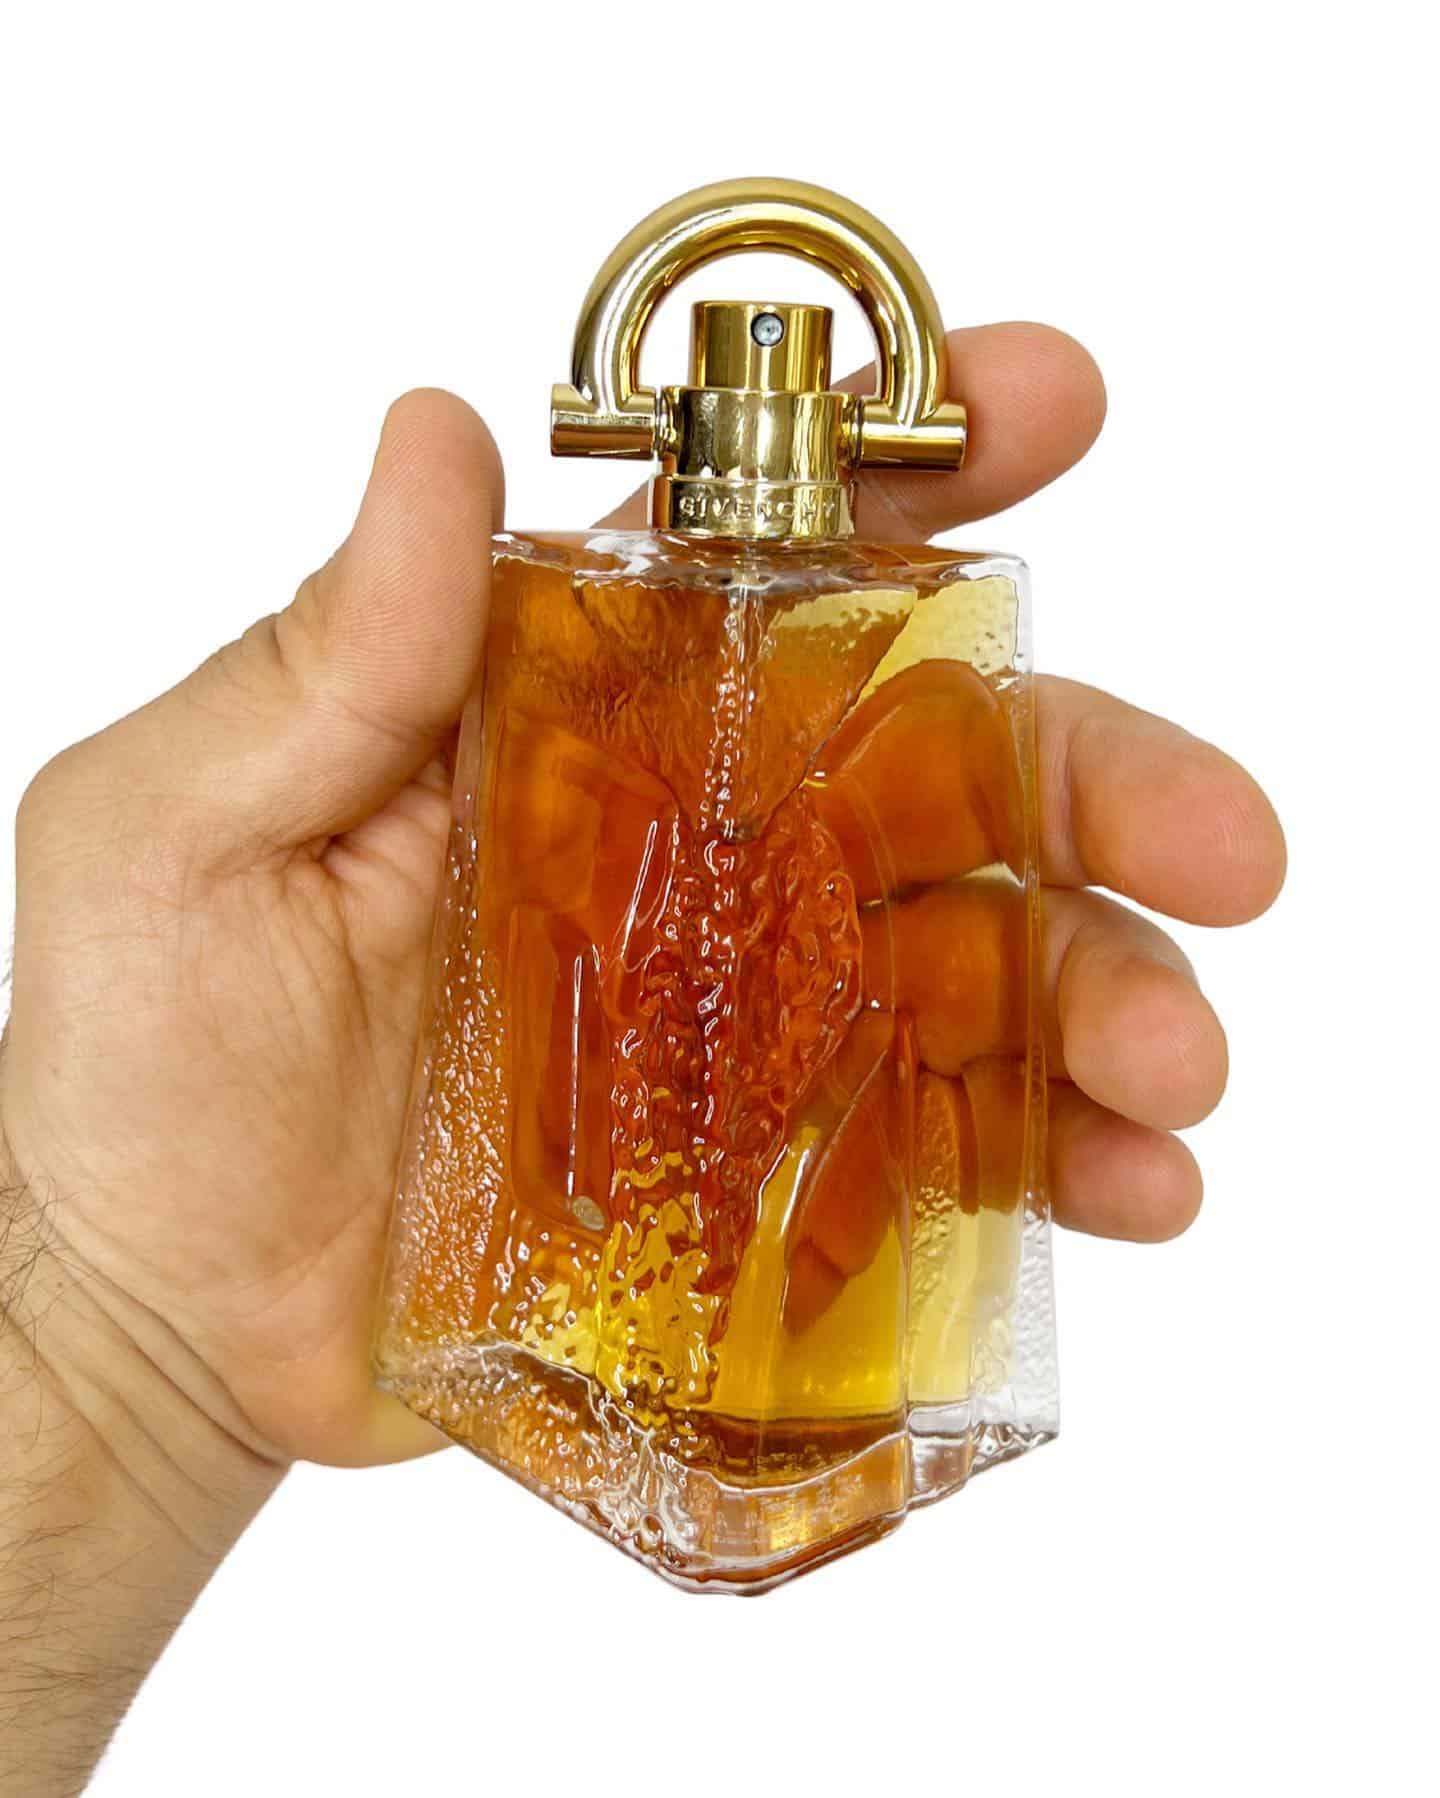 holding a bottle of givenchy Pi cologne